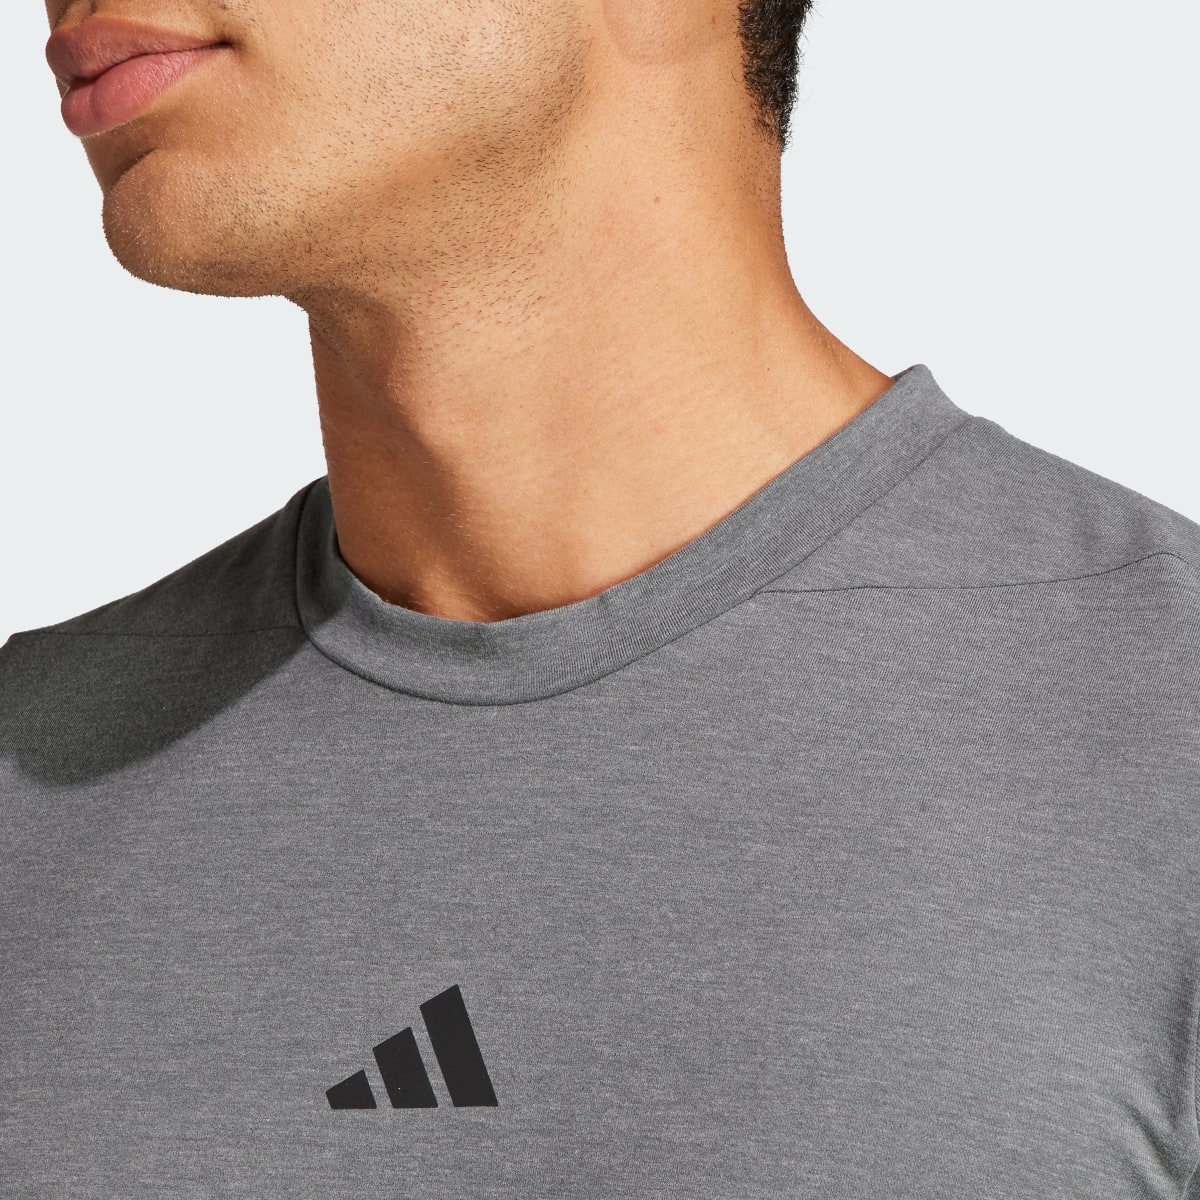 Adidas Designed for Training Workout Tee. 7